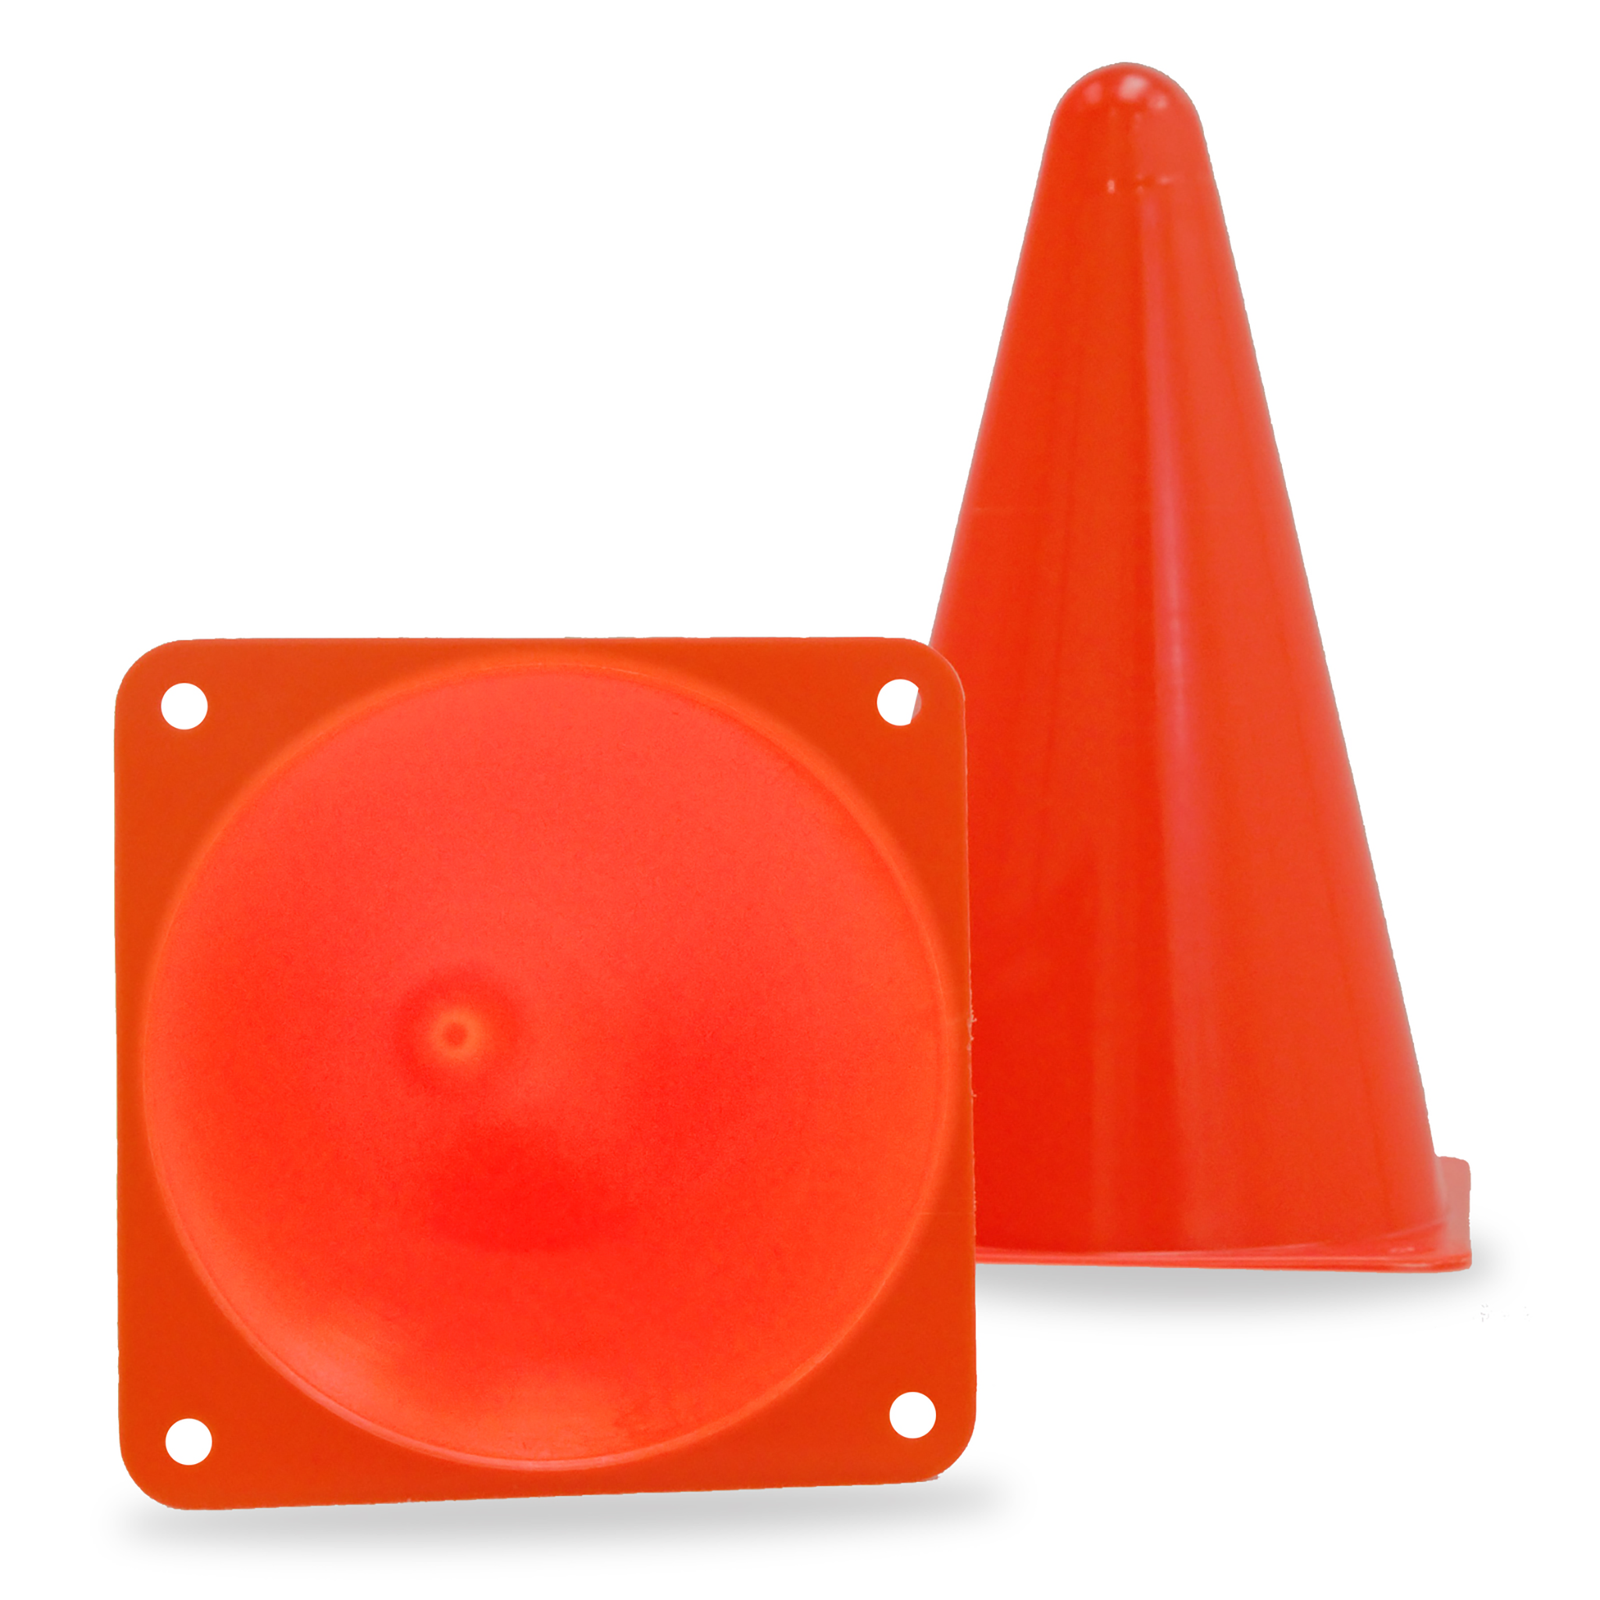 2 orange cones, one standing and the other one is on the ground showing 4 holes on the corners